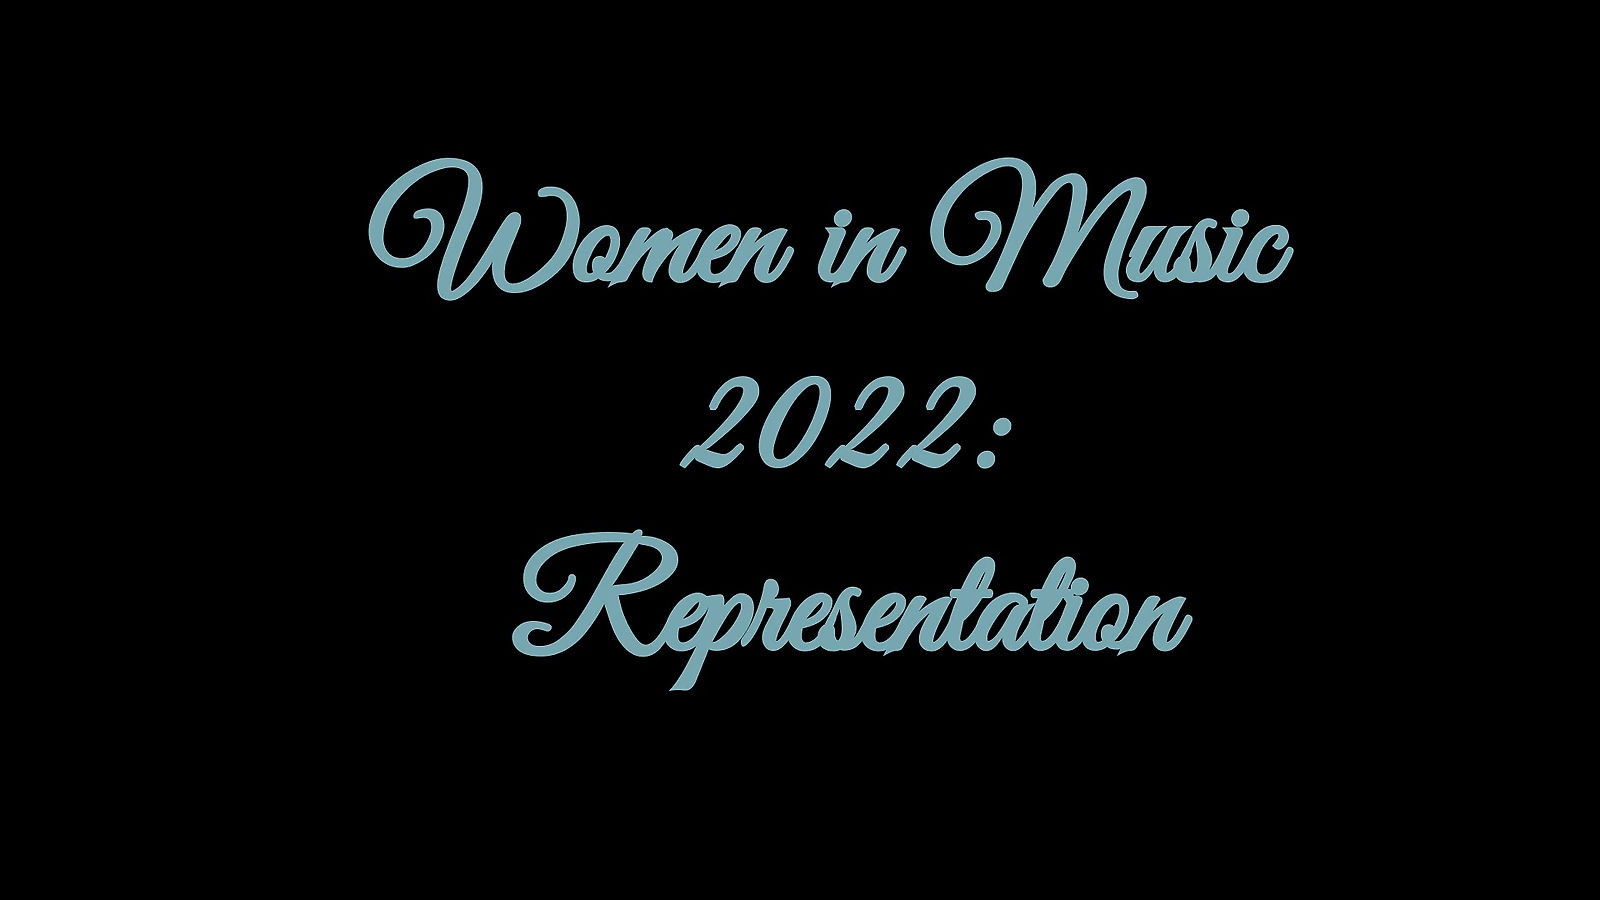 BE THE CHANGE: Women in Music 2022 Panel